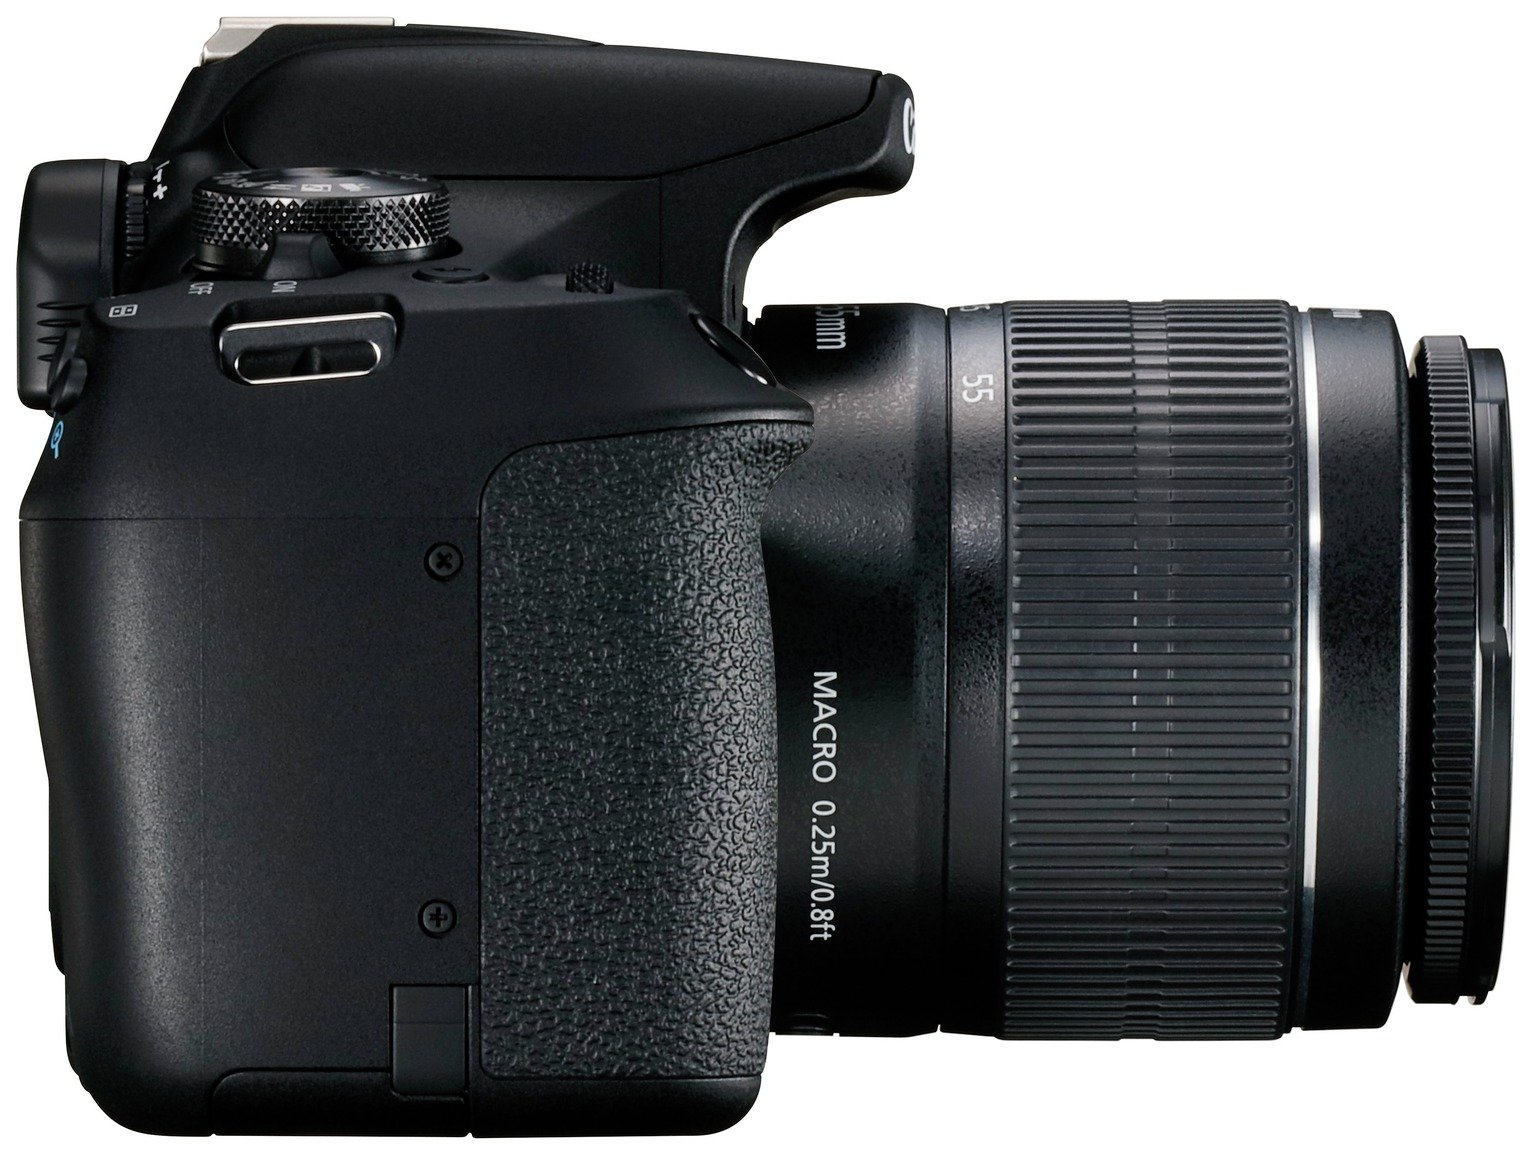 Canon EOS 2000D DSLR Camera with 18-55mm IS Lens Review